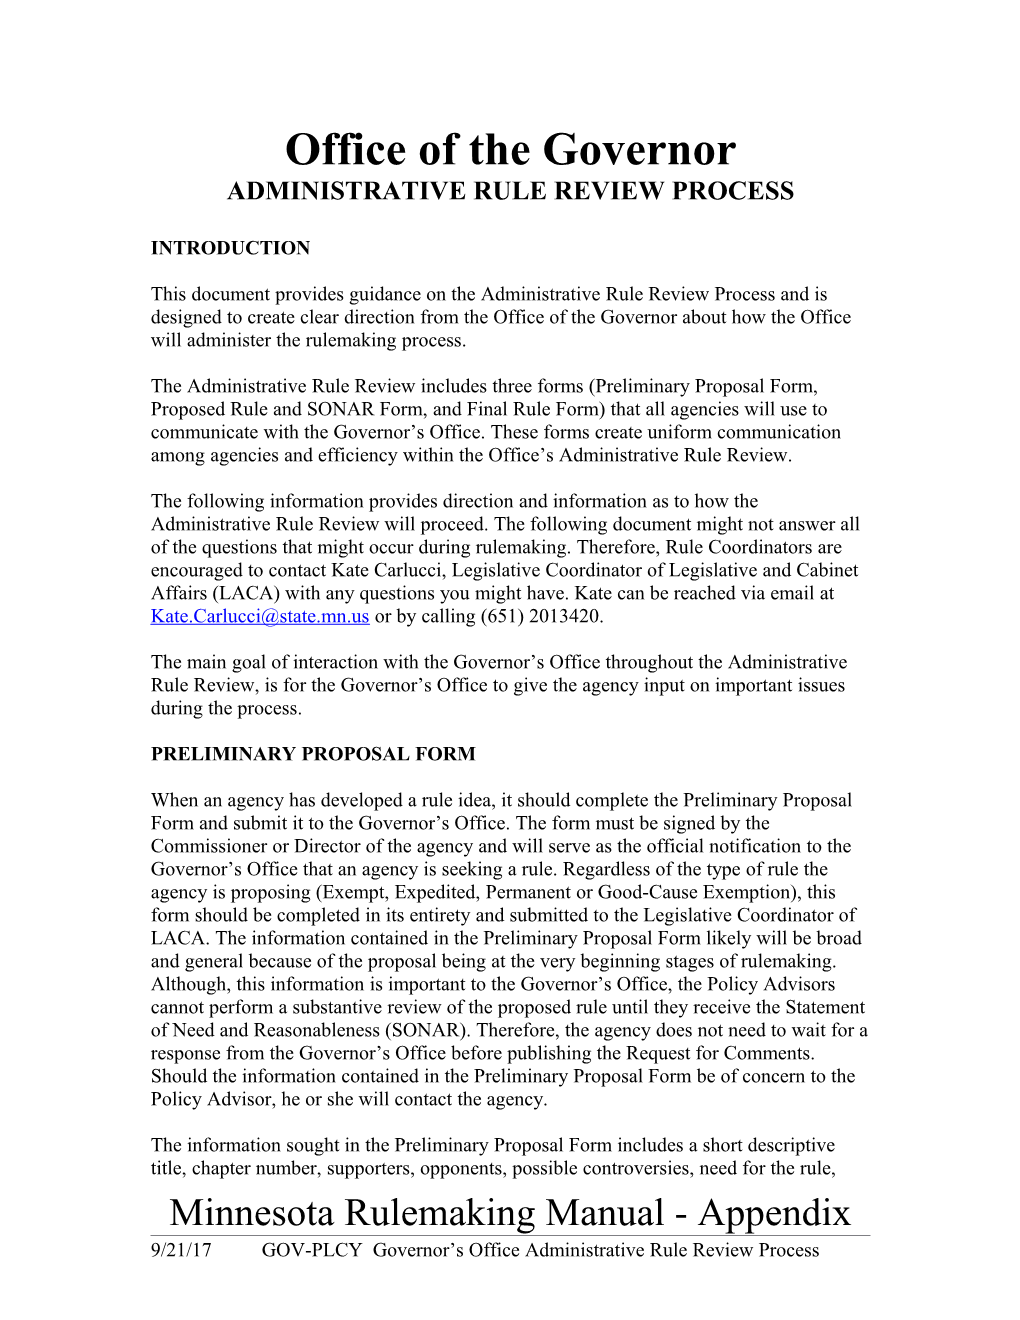 Minnesota Rulemaking Manual: Governor S Office Administrative Rule Review Process